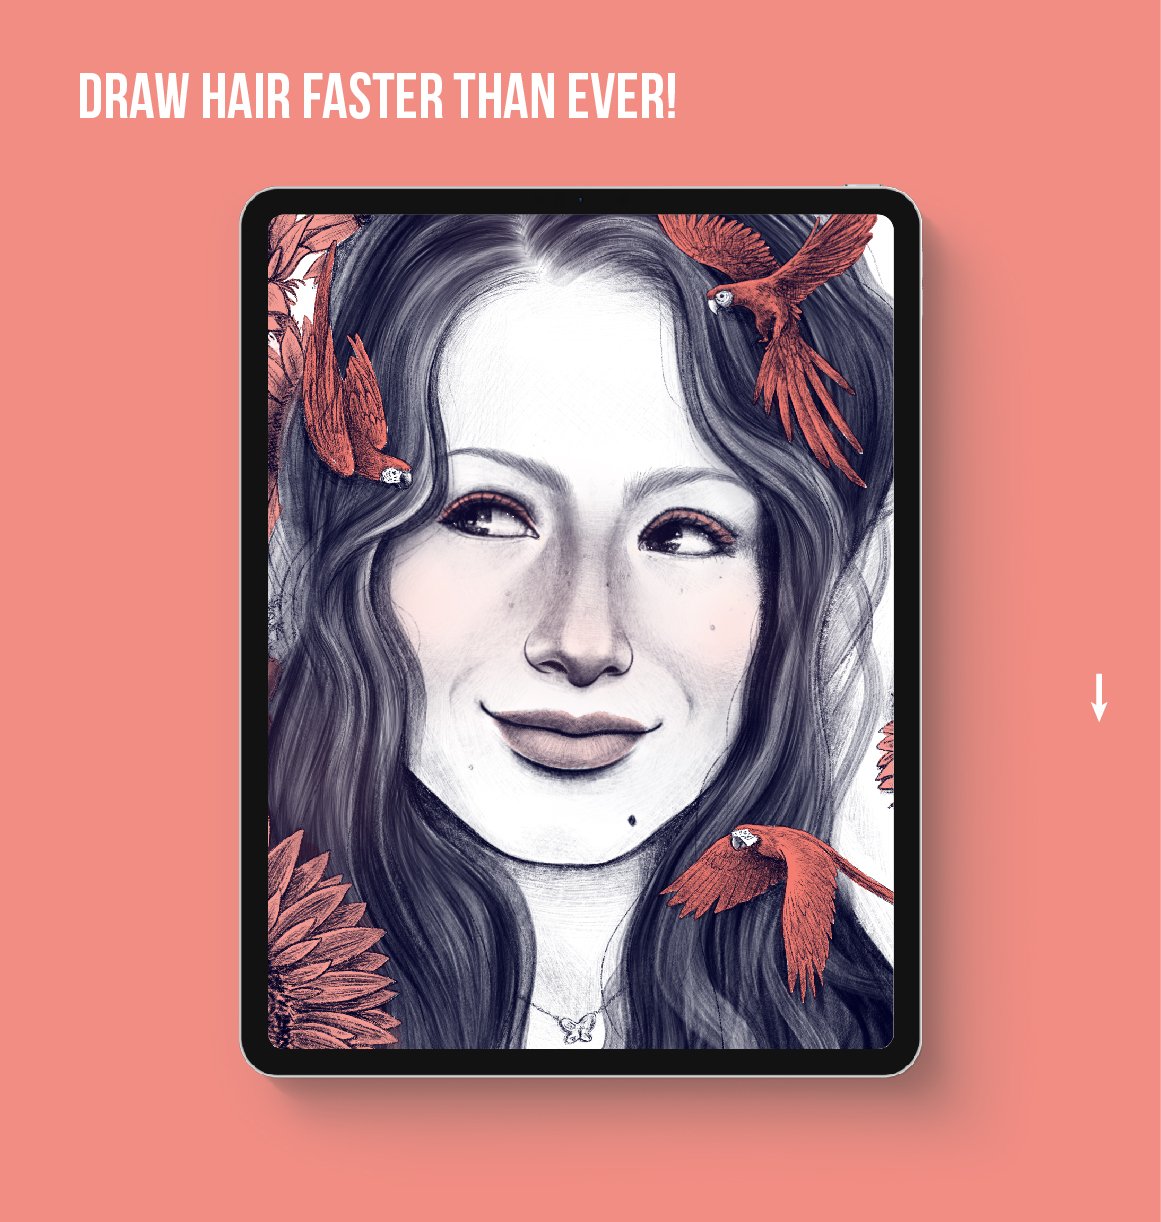 25 Hair Procreate Brushes for Every Hairstyle